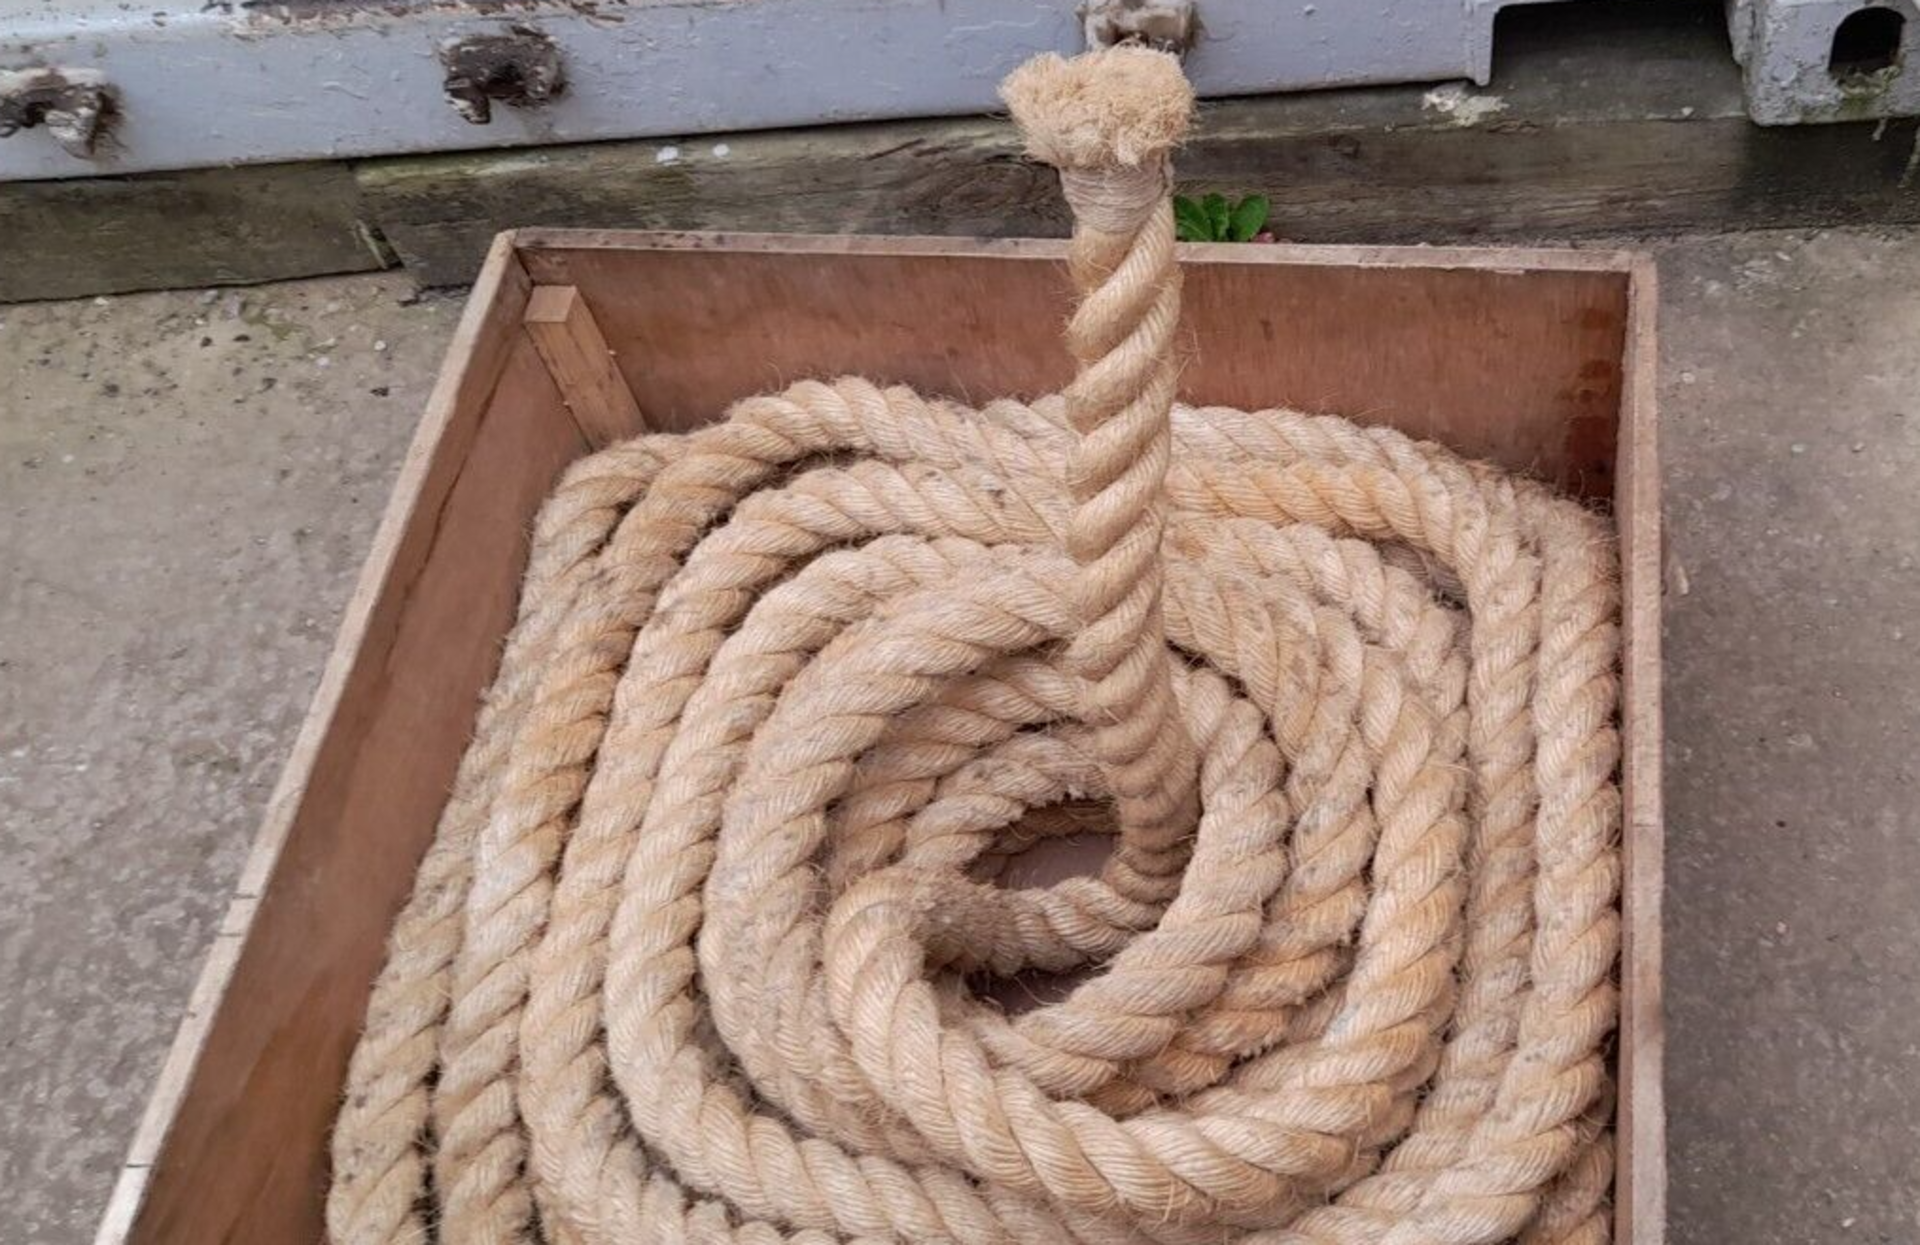 sport TUG O WAR ROPE, USED ONCE, DRY STORED, ABOUT 29 METERS L X 13cm circumference sport gym - Image 4 of 5